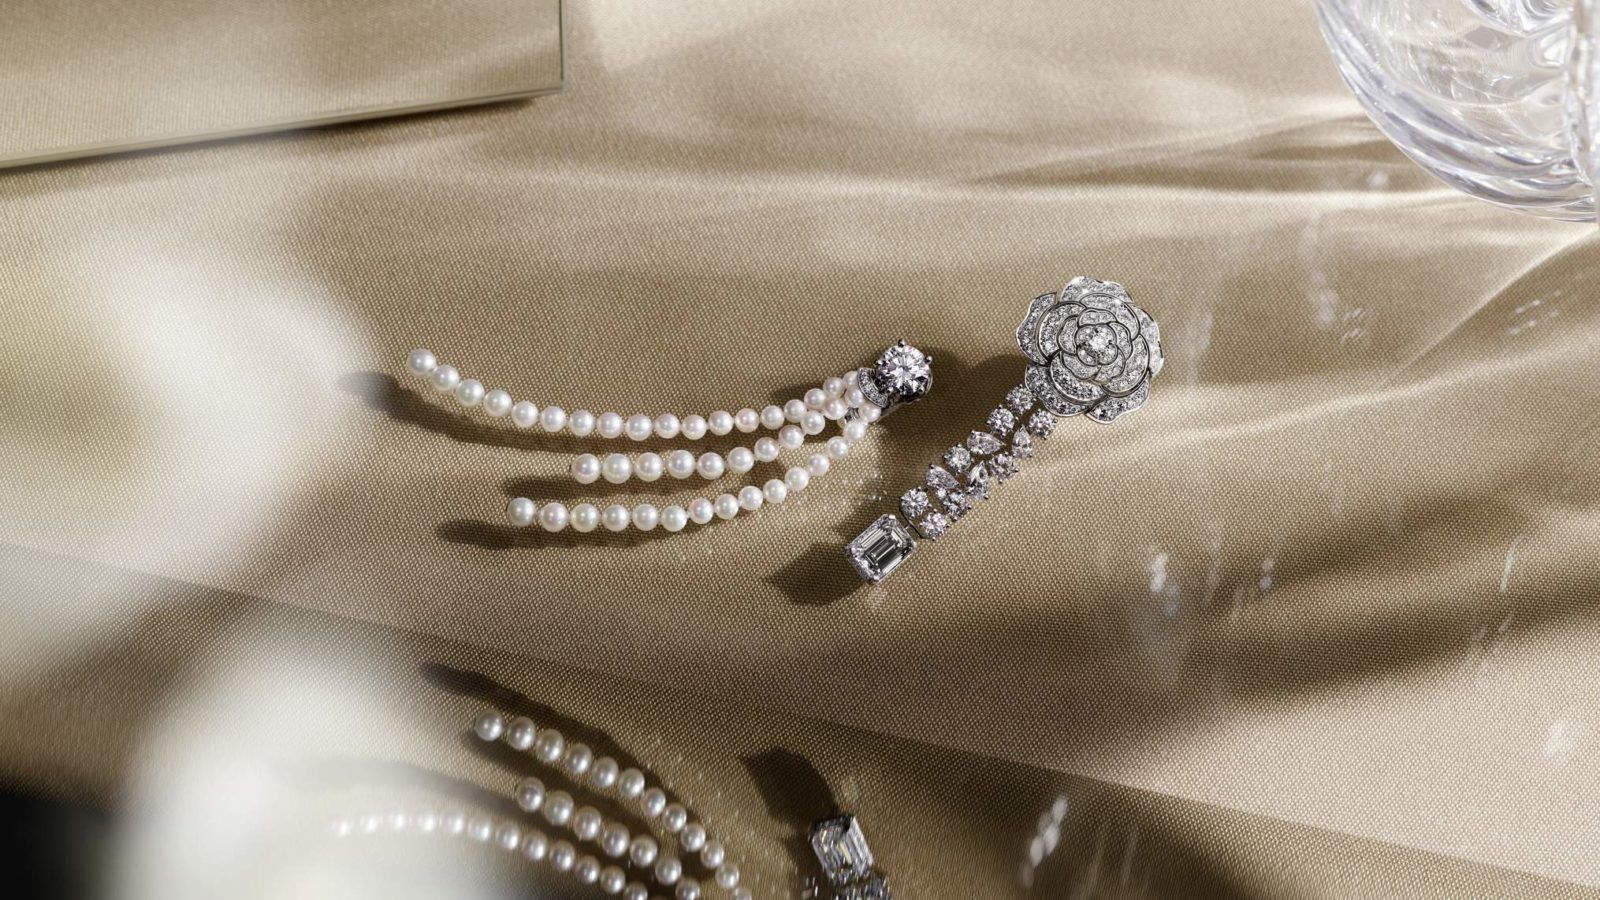 Chanel Style Camellia and Pearls Hair Claws